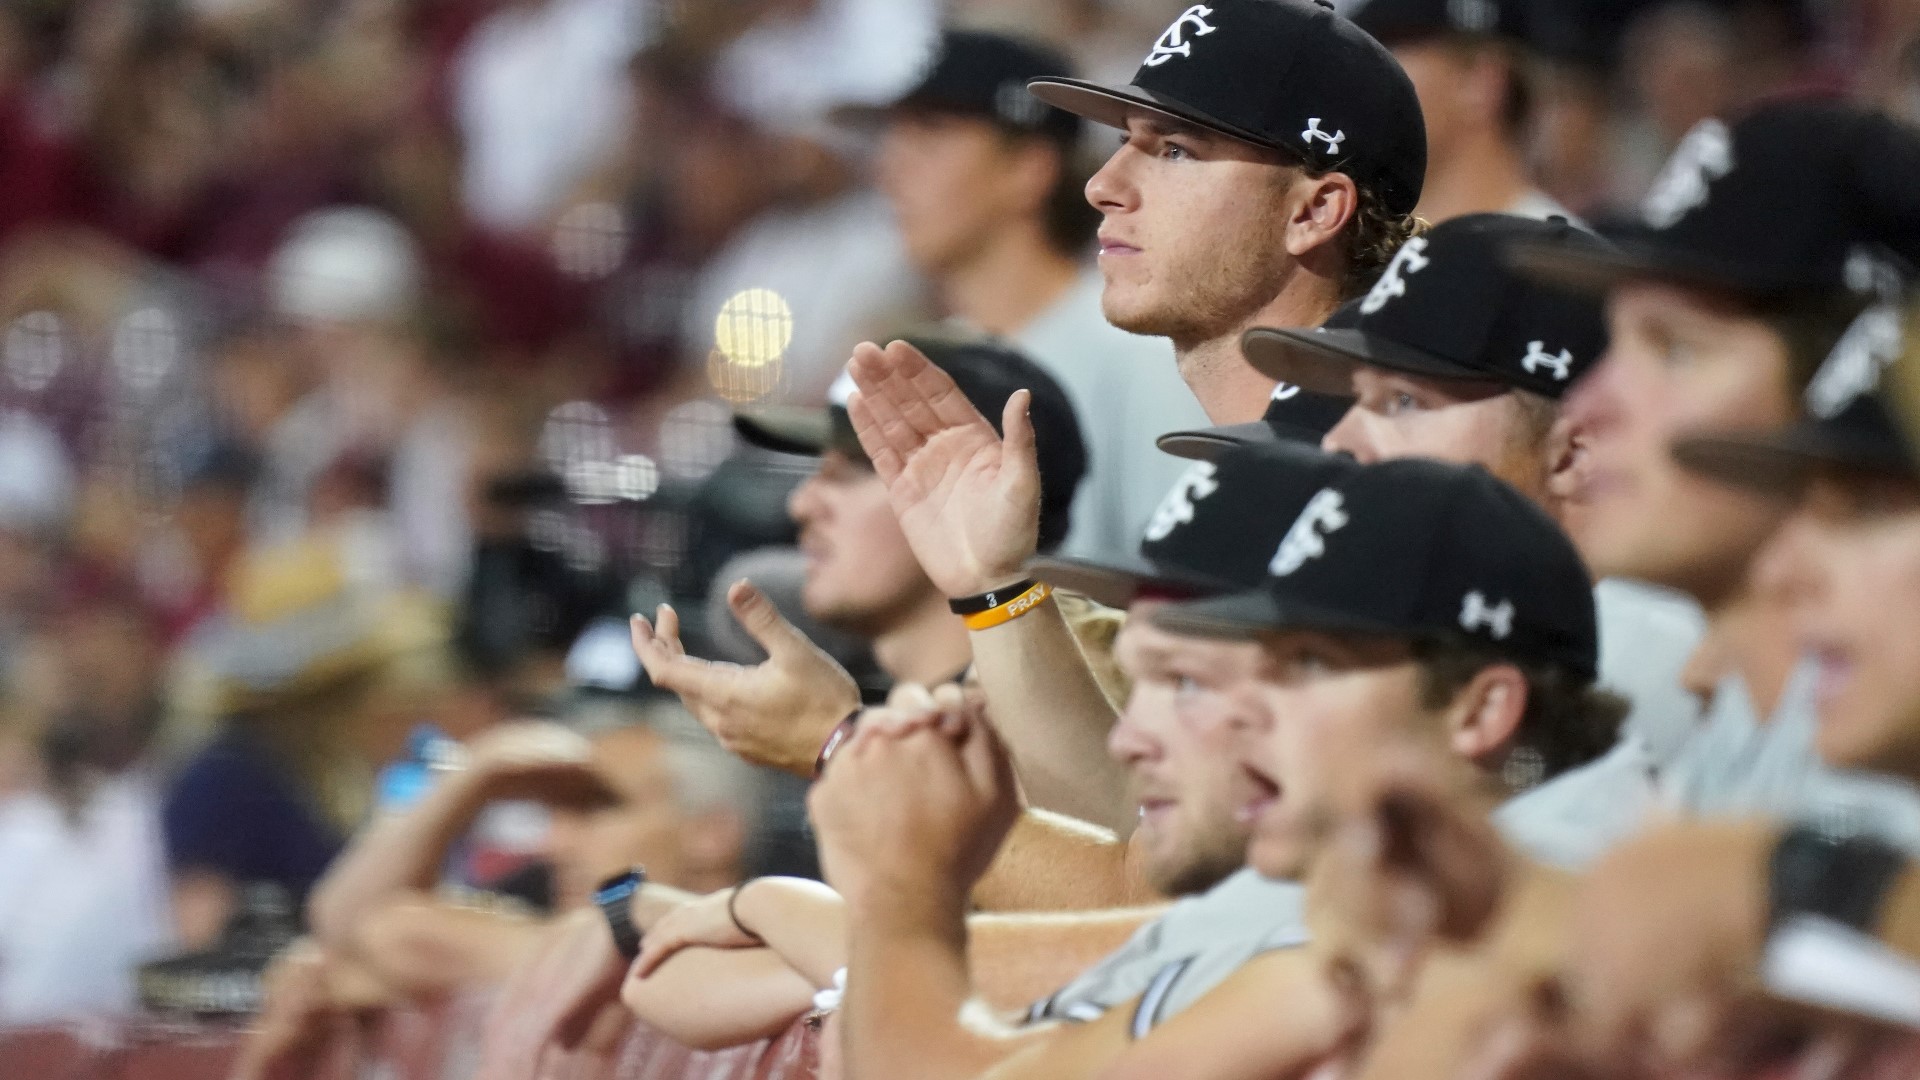 South Carolina's powerhouse performance secures regional win and sets sights on super regionals.